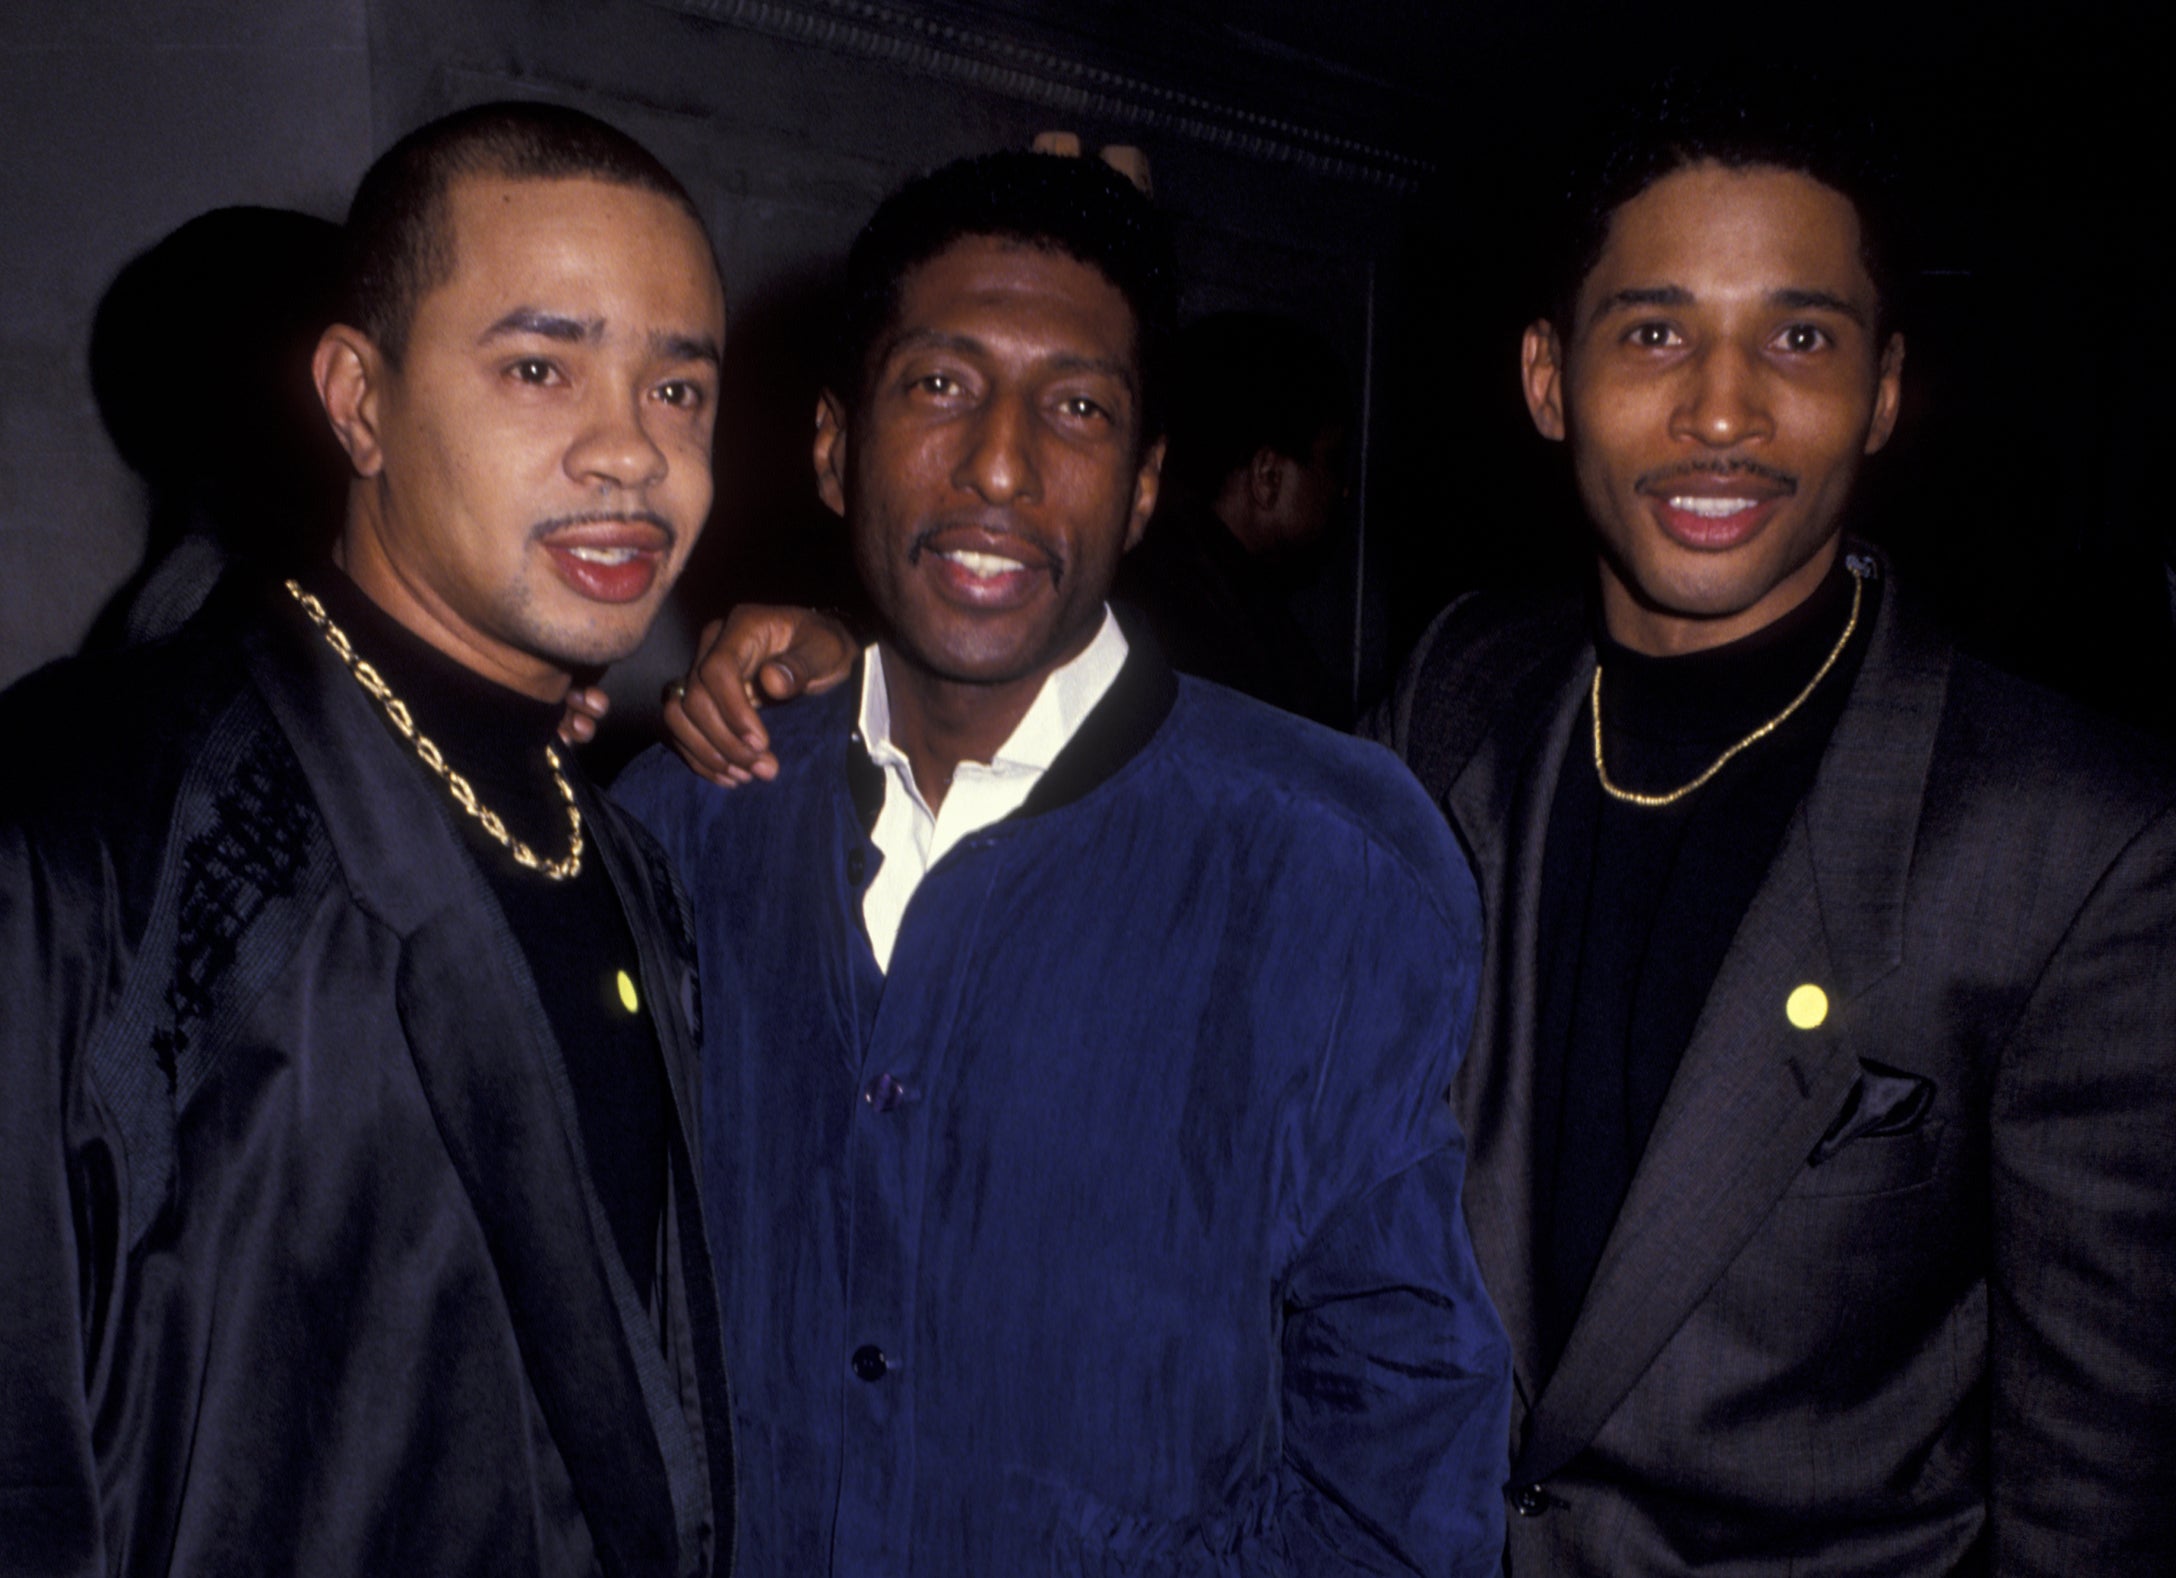 'After 7' Singer And Babyface’s Brother Melvin Edmonds Dies At 65